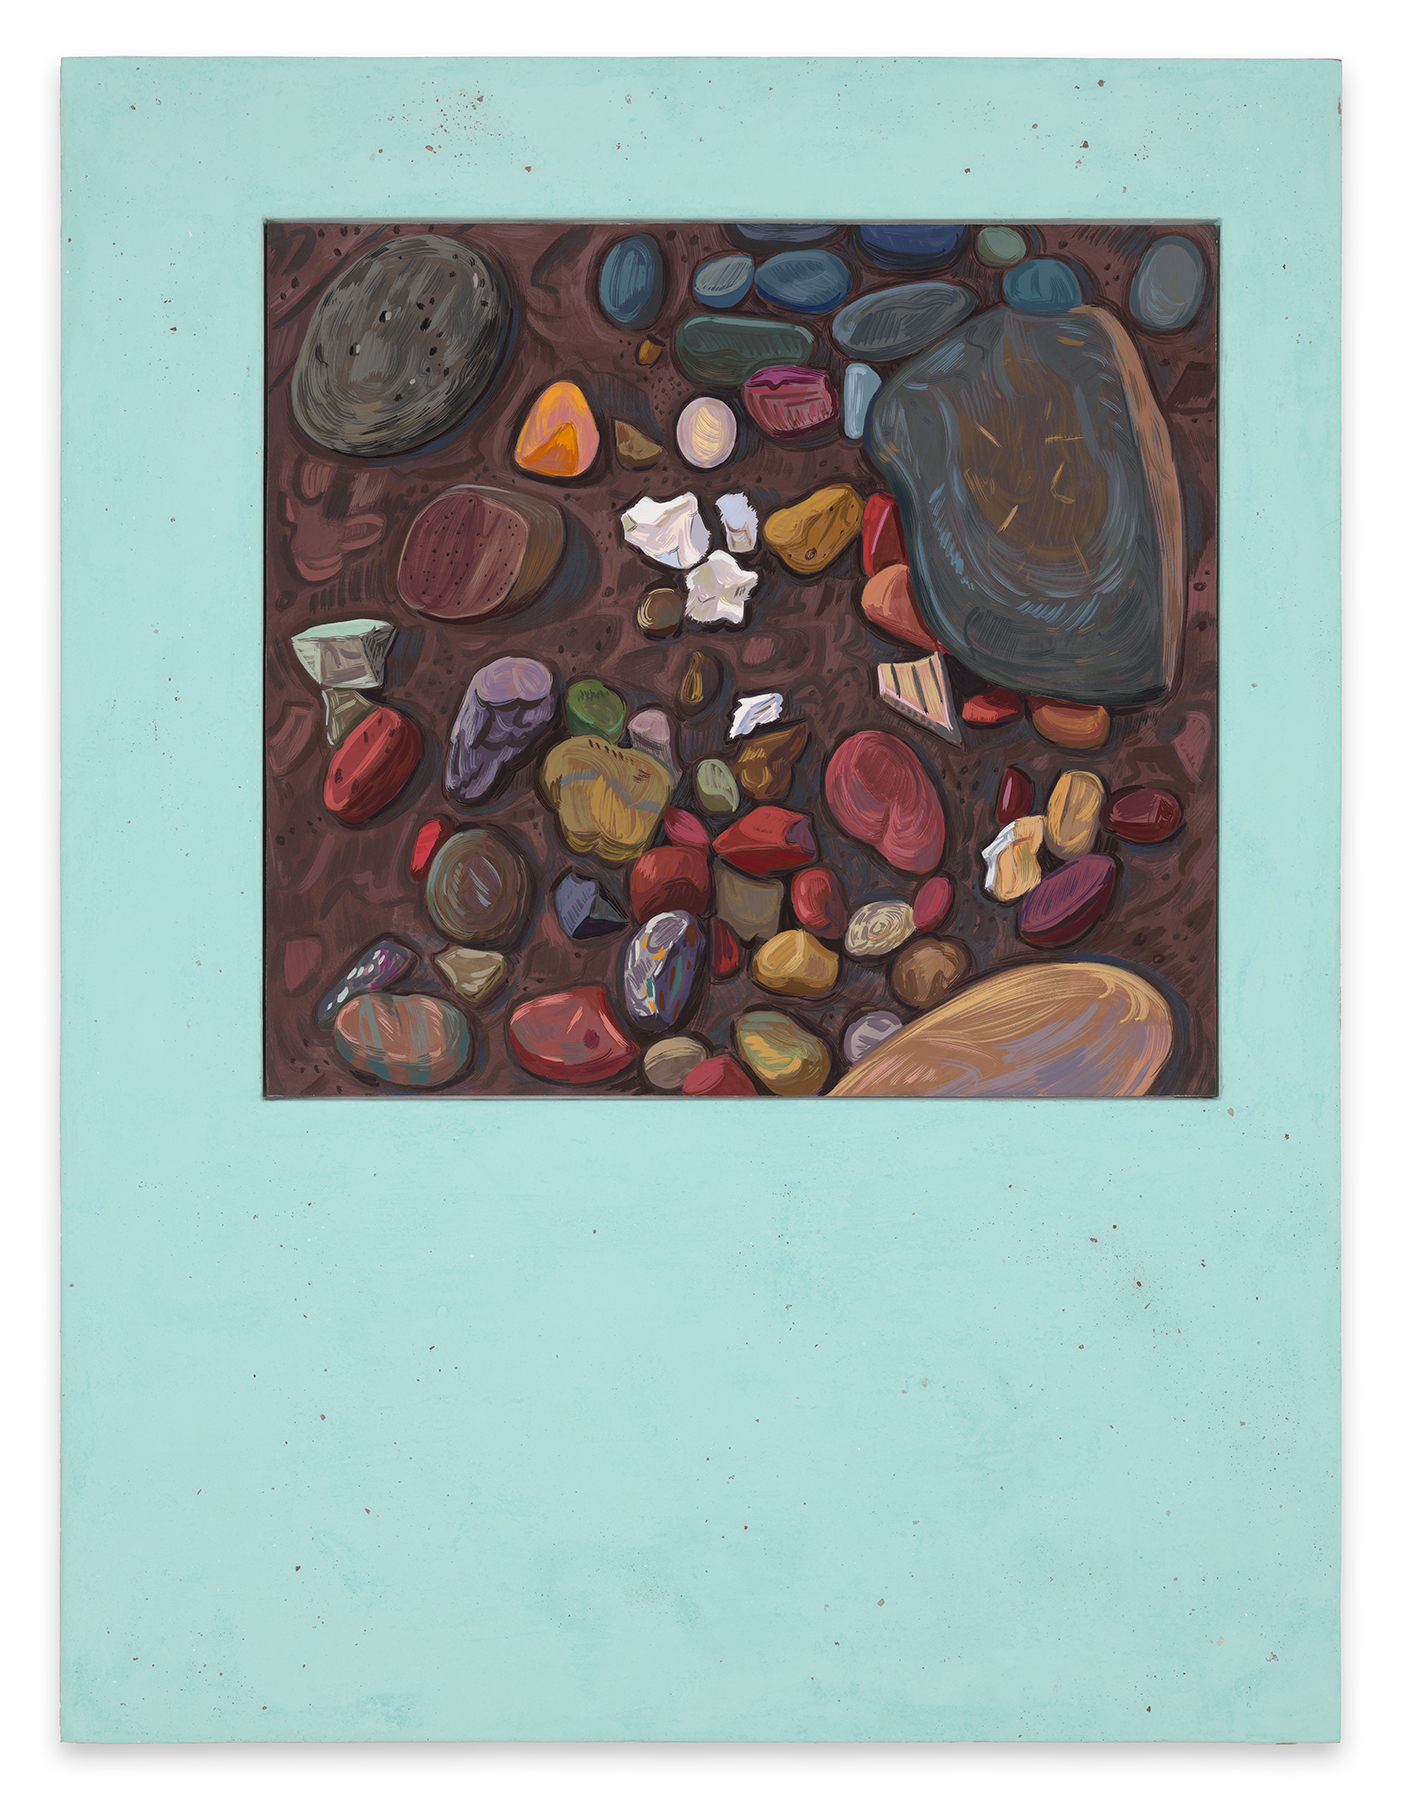 This image shows a painting which is framed in a pigmented pastel robin-egg blue panel that includes fragments of earth and rocks from the sites where the paintings were made. The focus of the painting directs the viewer to look down on a scattered array of colorful rocks and stones, in various shapes and sizes, sitting on the dirt. Energetic short, curved, squiggly and linear brushstrokes in browns, reds, pinks, yellows, blues, greens, greys, white, creams and purples accentuate the curvature or angularity of the various stones and pebbles. There are 2 large gray and bluish stones occupying the upper left and upper right corners of the painting along with a large rounded yellowish-brown stone with pink and blue hash marks emerging from the lower right corner of the picture plane. Occupying the upper top of the painting is a circular collection of rounded, oblong shaped stones in shades of blue, green and gray. Adjacent to the large gray stone, in the center of the composition, are white, yellow, orange and red rocks with a singular grey striped potsherd.  The bottom half of the painting is filled with multiple little clusters of colorful rocks and pebbles. The picture plane becomes a dynamic interplay of color, shapes, and form with the dirt and ground as the base.